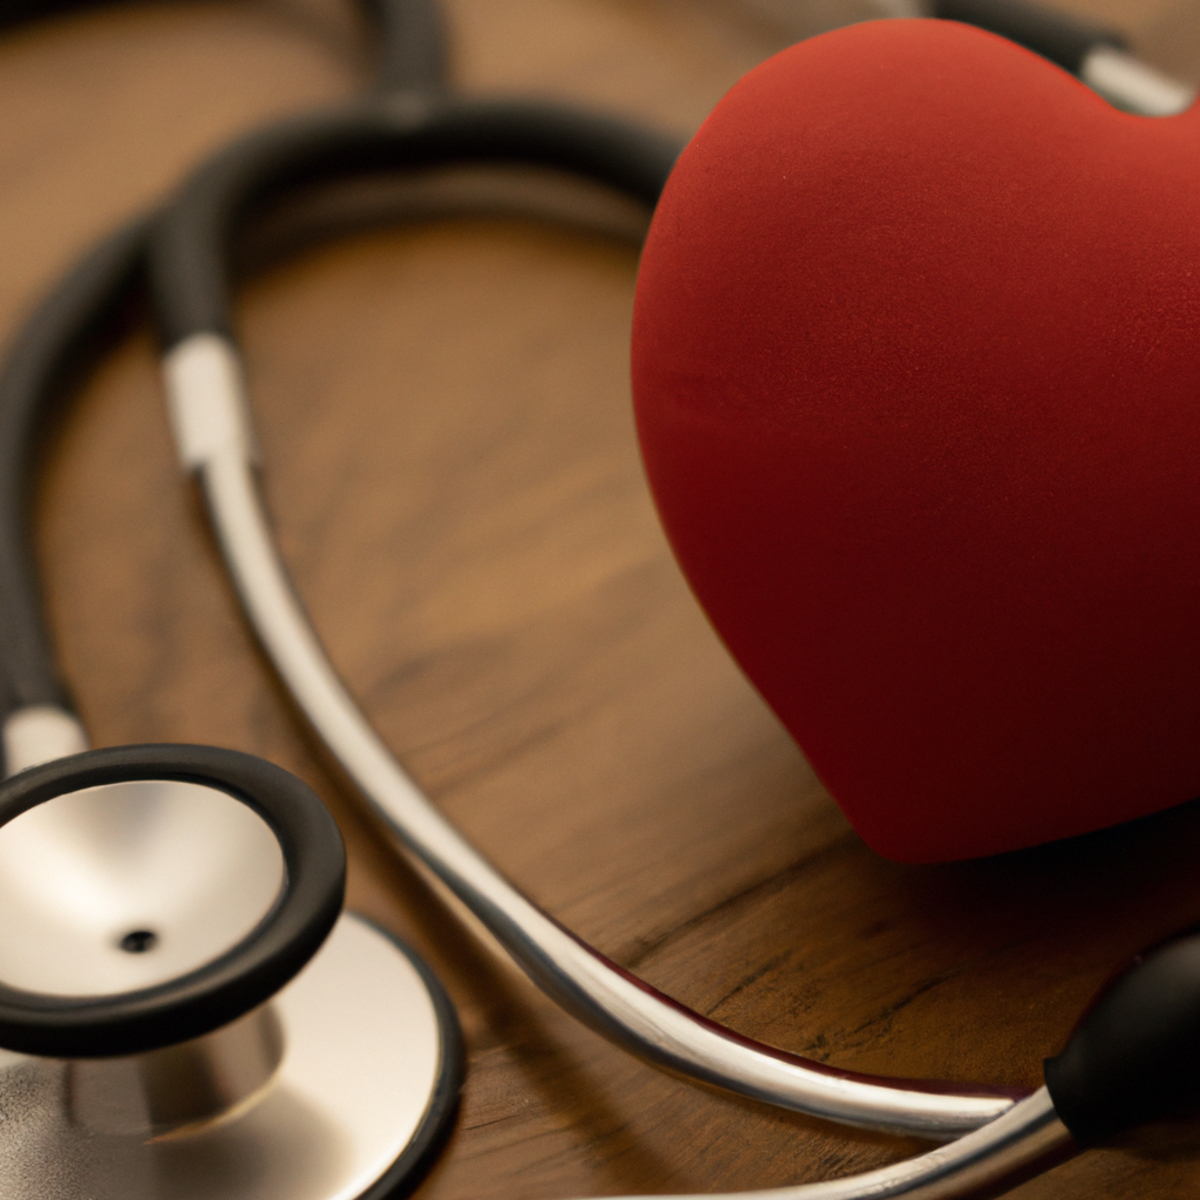 Close-up of stethoscope and heart-shaped stress ball on table, highlighting intricate details and soft texture. Warm lighting creates inviting atmosphere, representing importance of cardiac examination and stress management in athletes with hypertrophic cardiomyopathy.